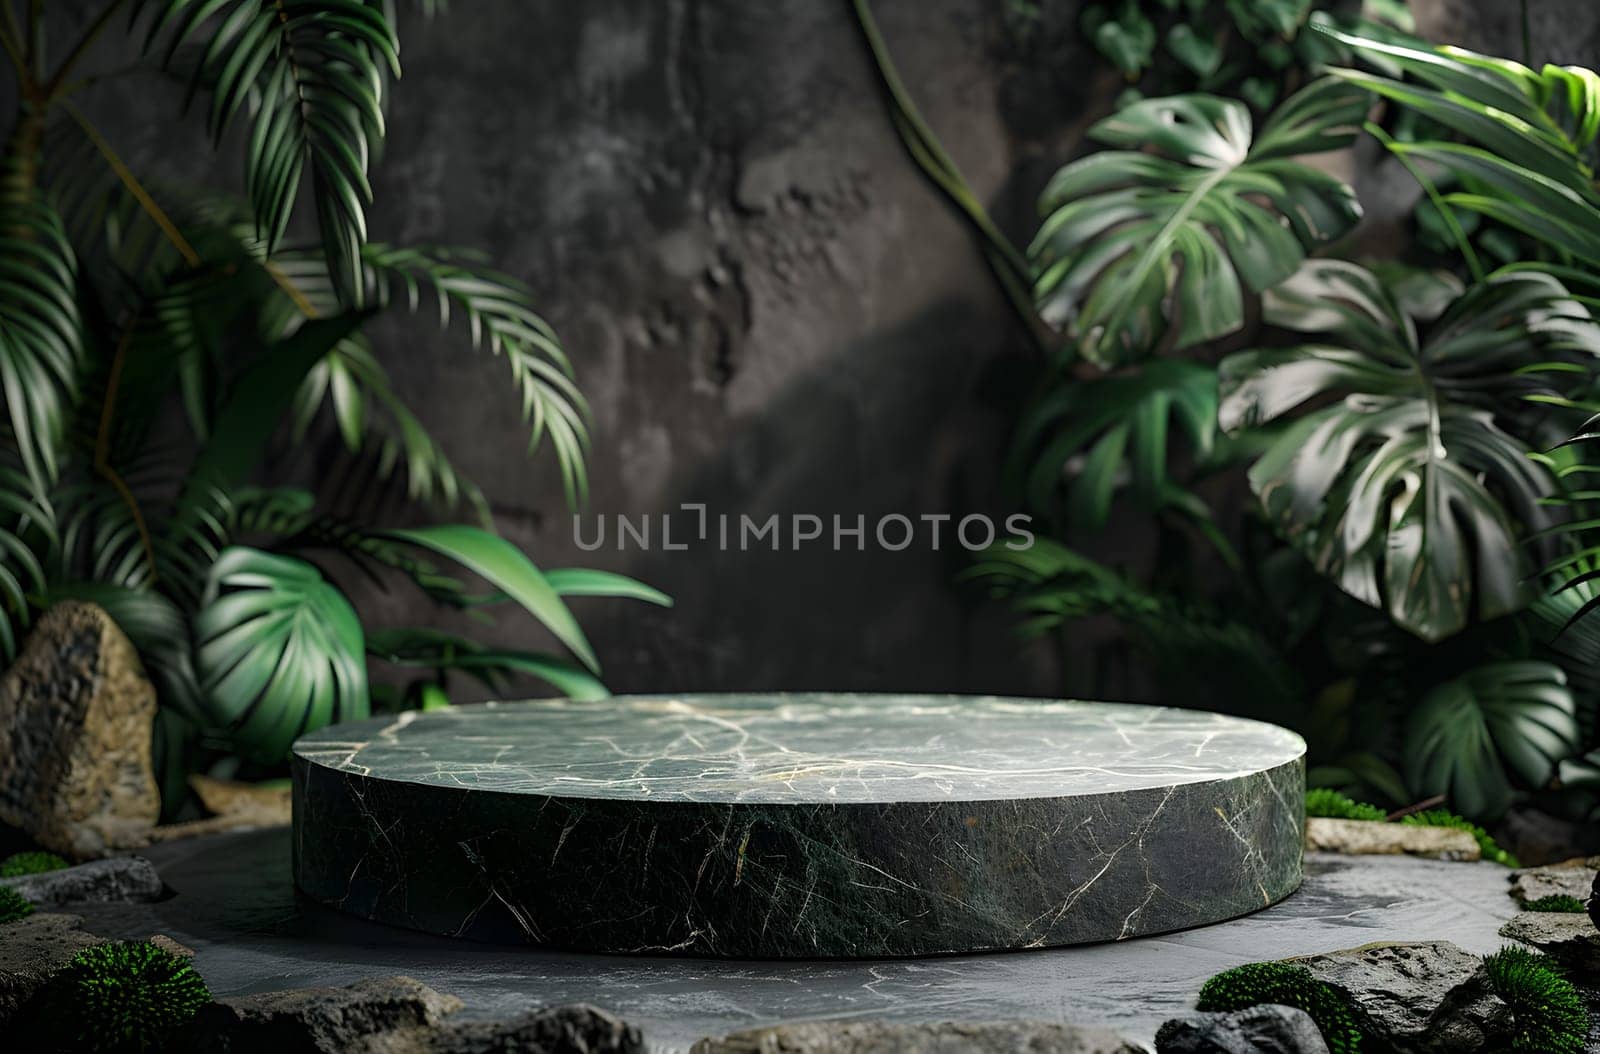 A marble podium stands amidst a dense jungle, surrounded by lush plants and rocks. The natural landscape is dominated by terrestrial plants and trees, creating a picturesque scene